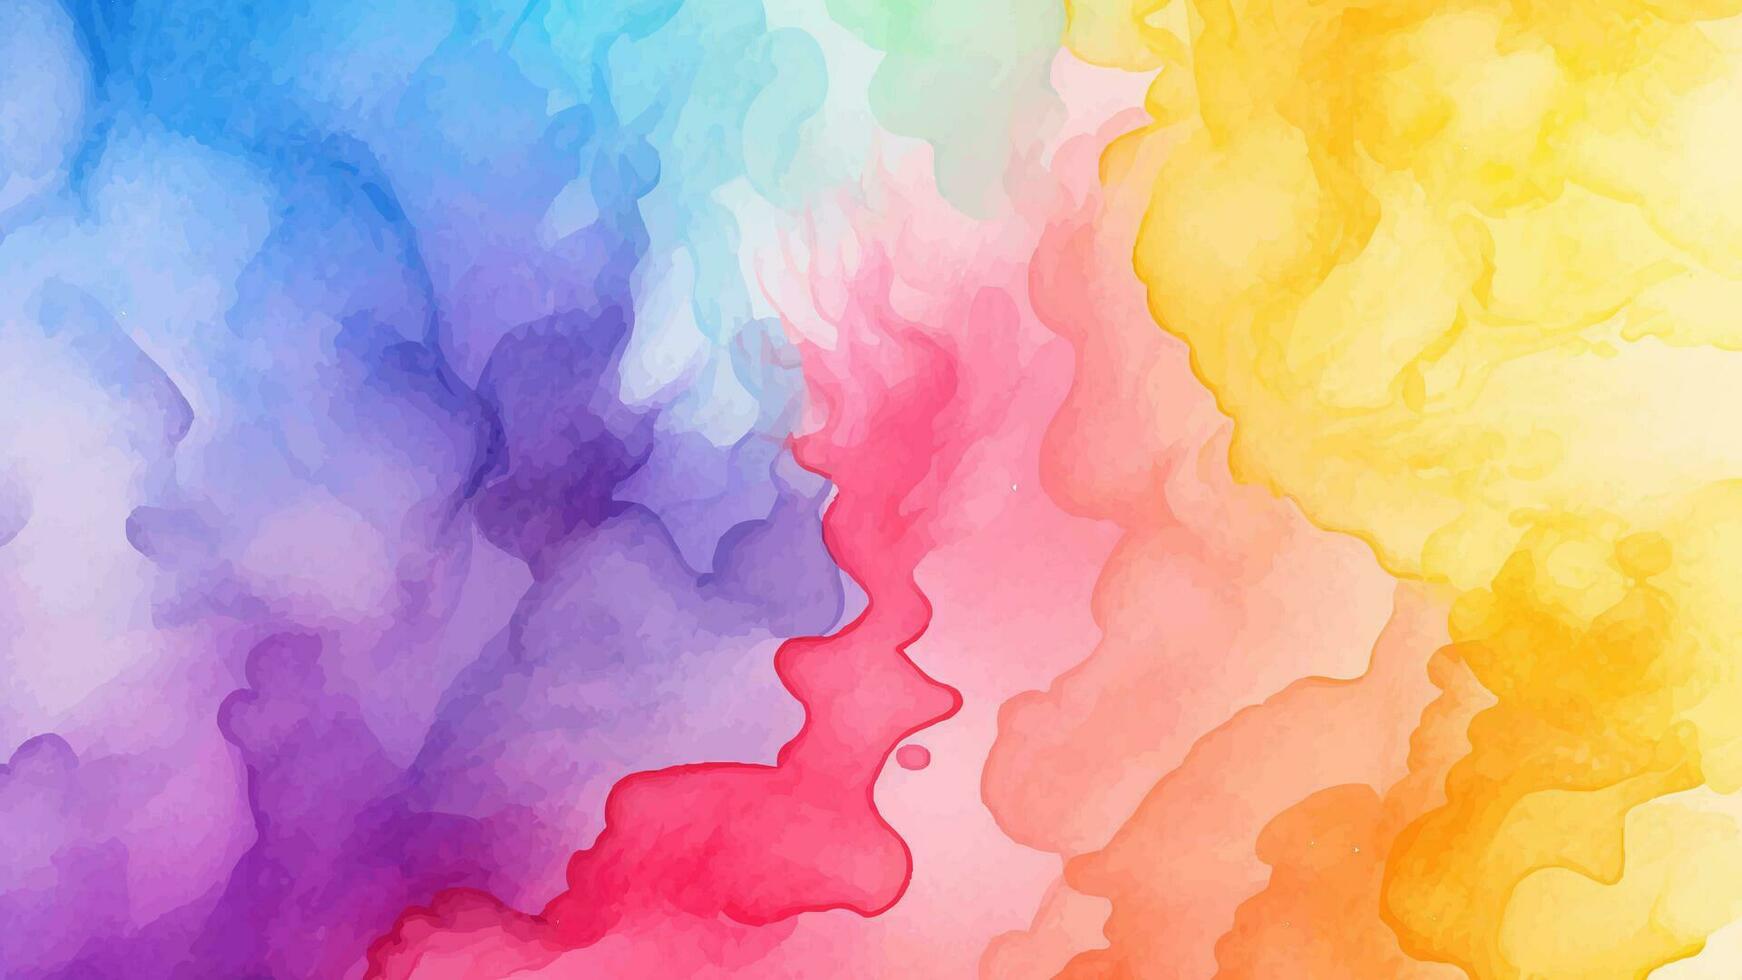 Abstract pastel watercolor background. Rainbow watercolour pattern